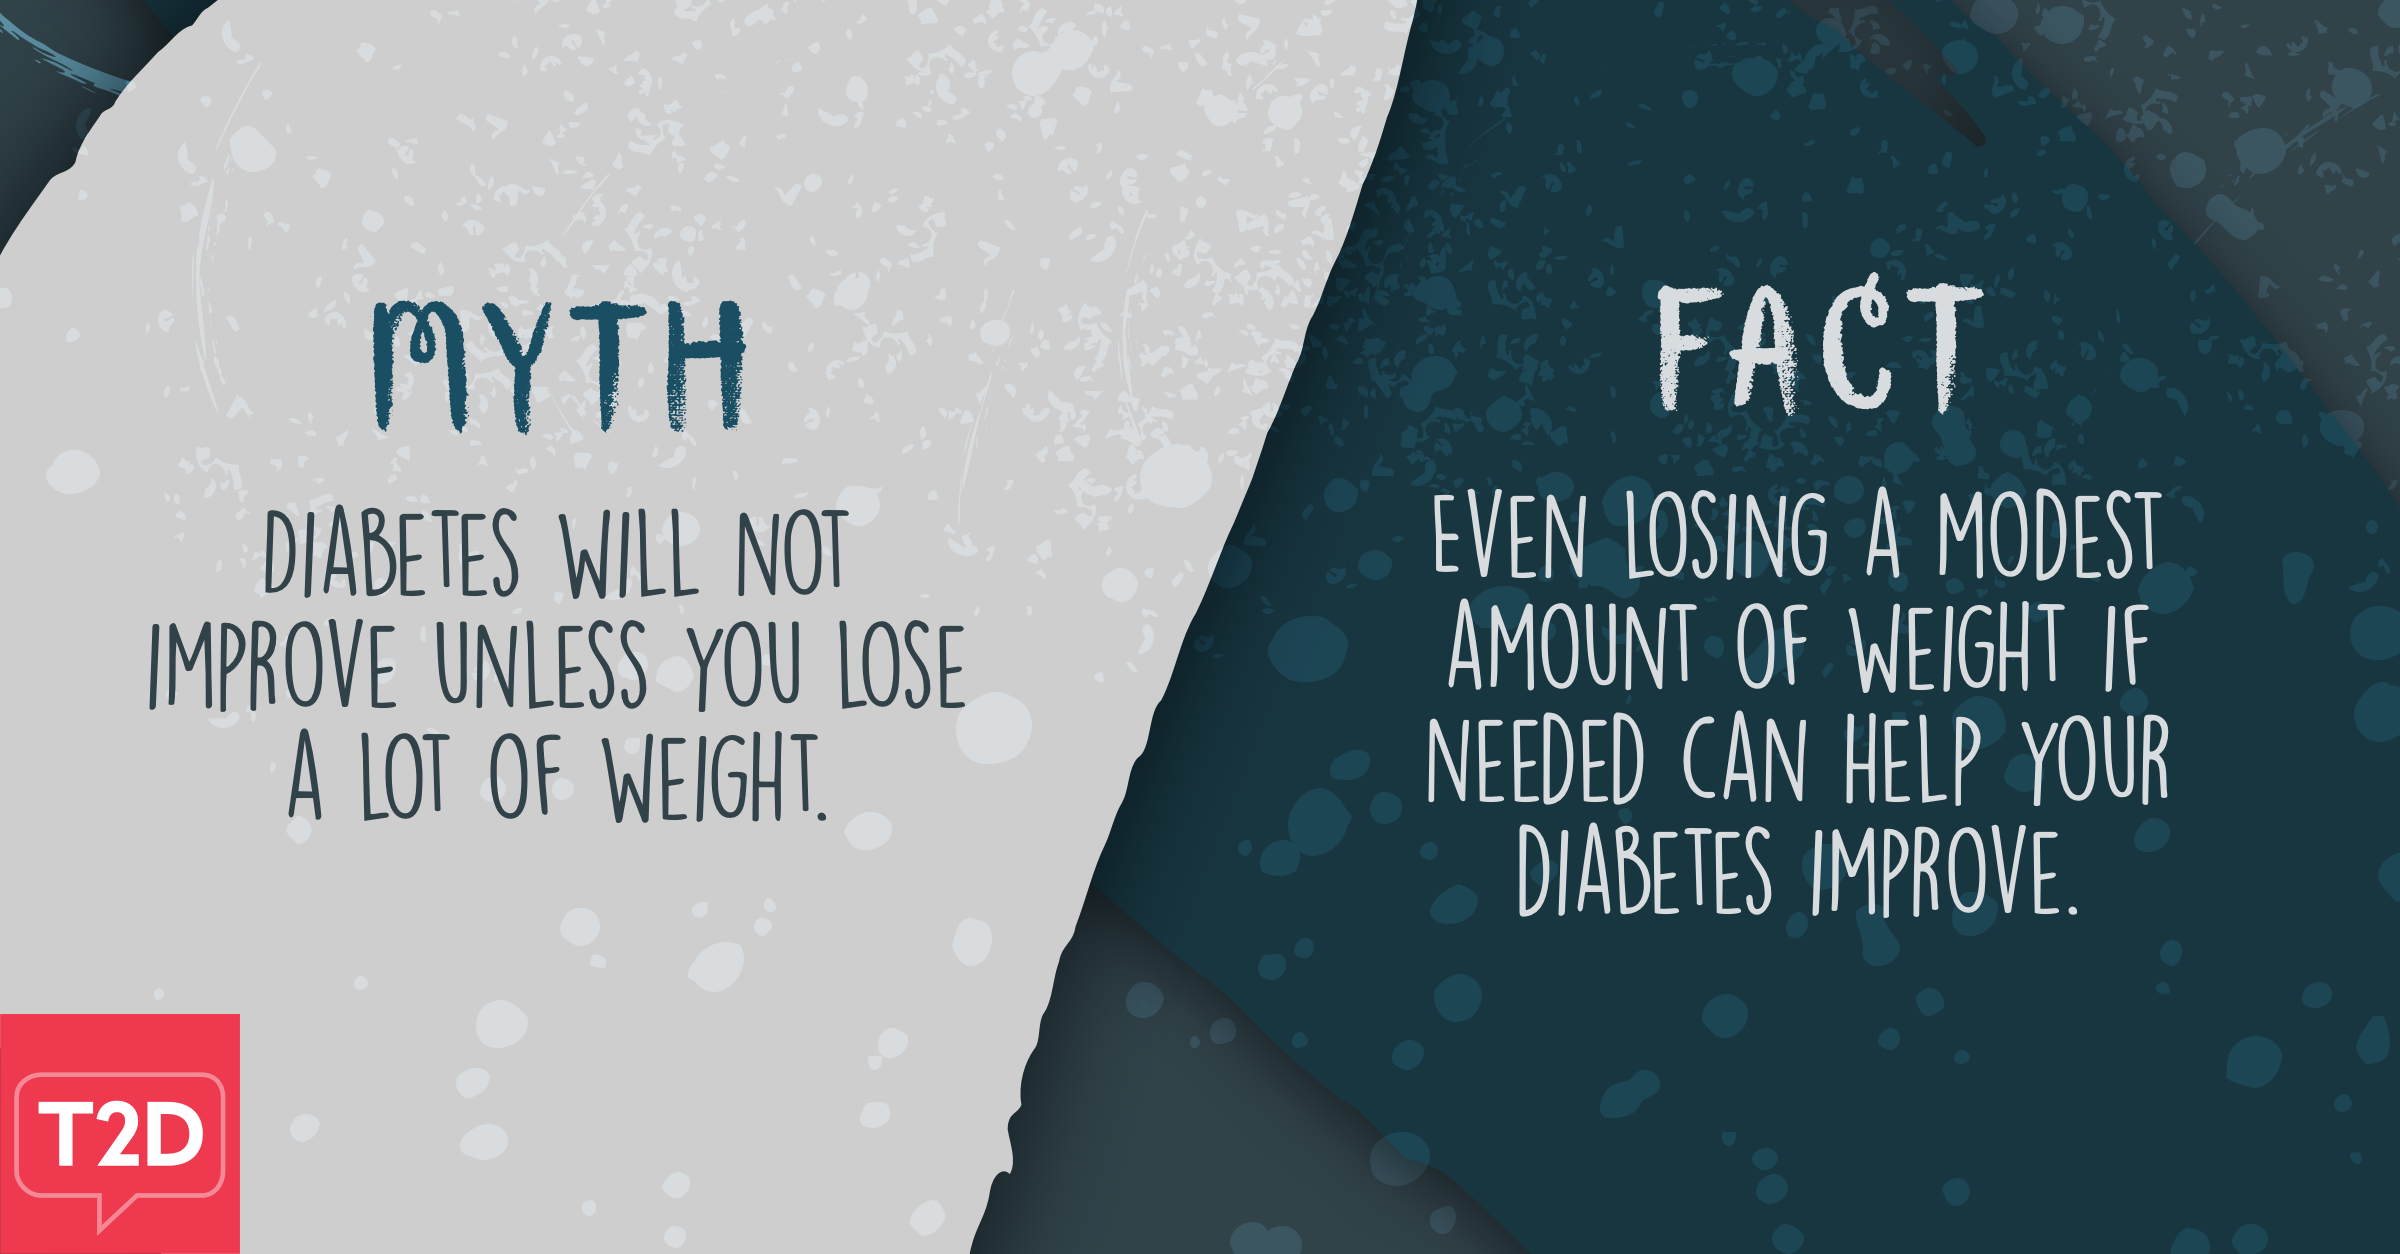 Myth: Diabetes will not improve unless you lose a lot of weight. Fact: Even losing a modest amount of weight if needed can help your diabetes improve.